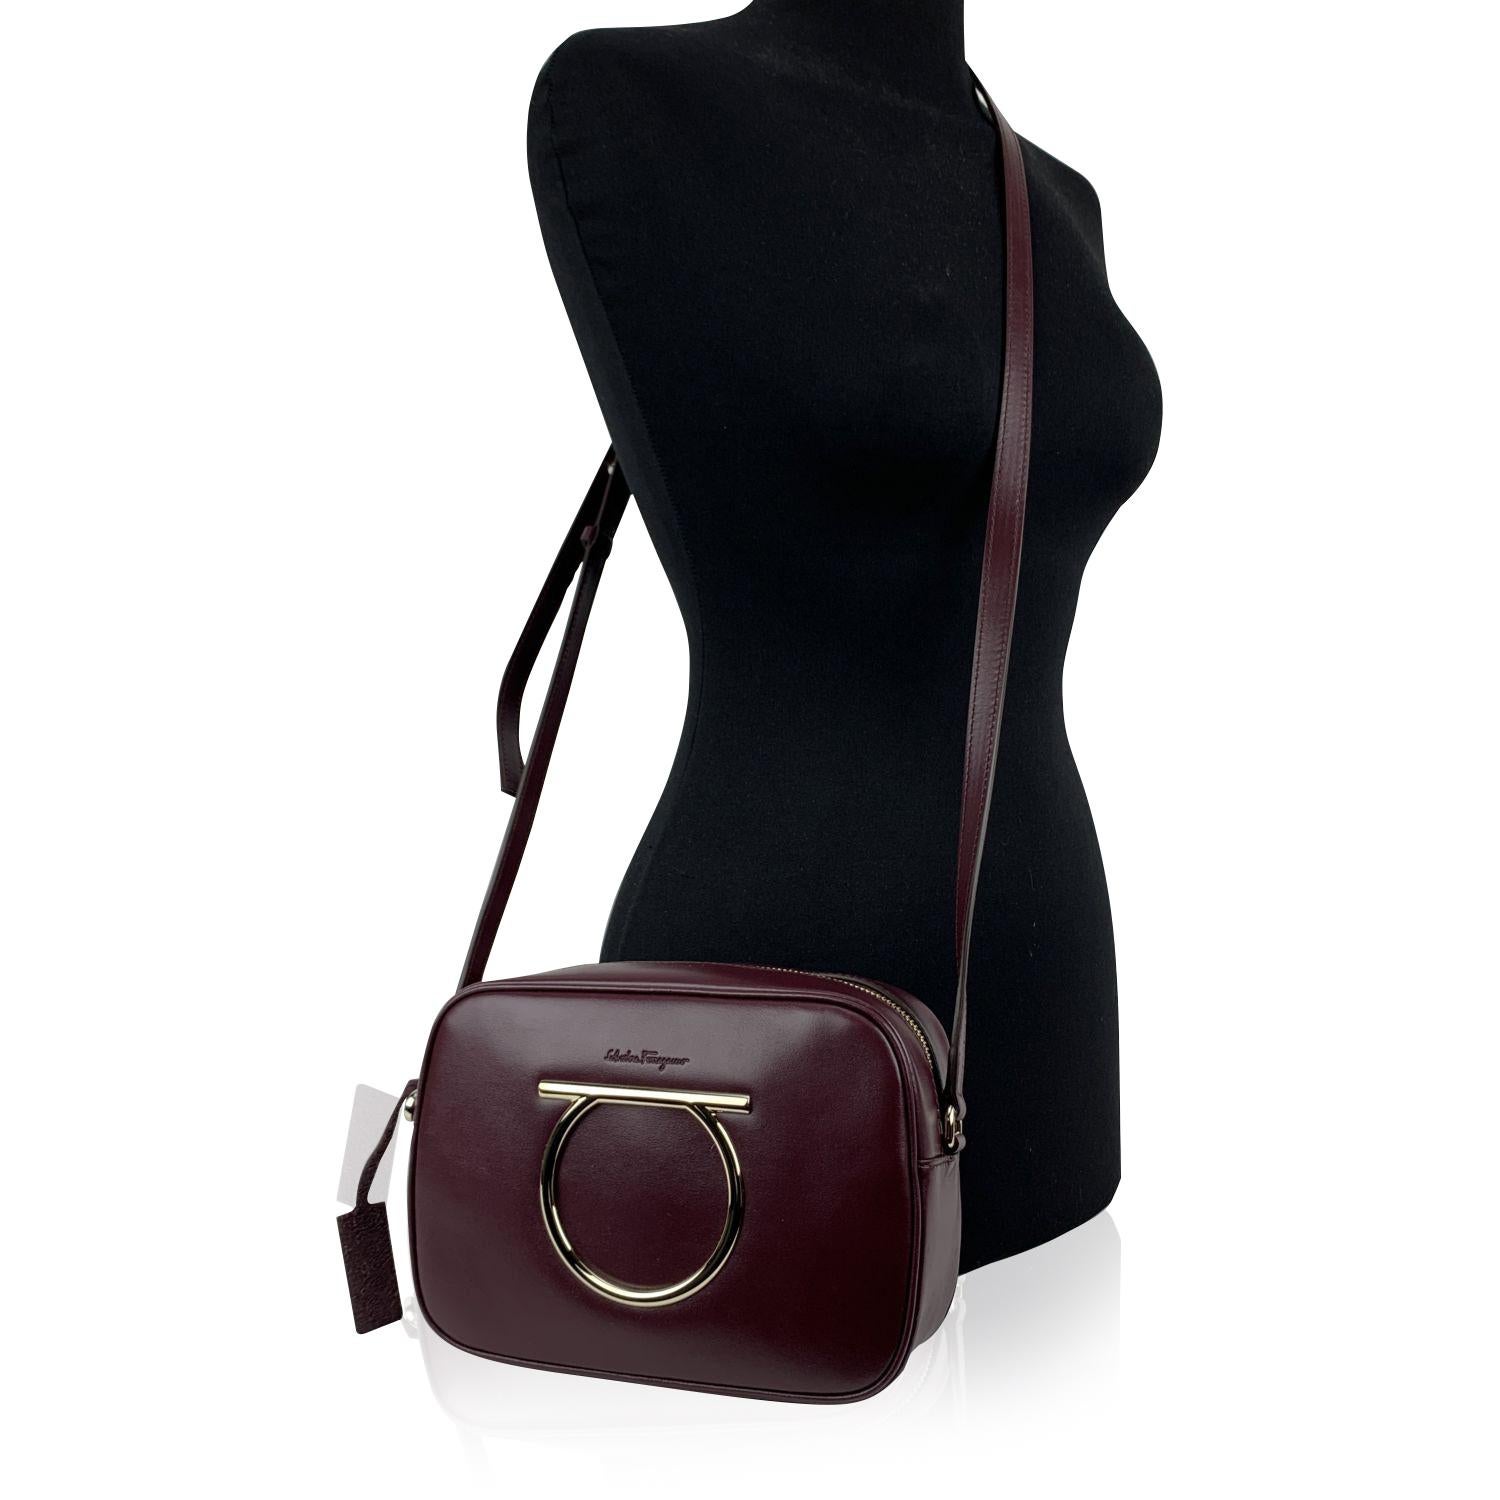 Beautiful 'Vela CC' shoulder bag by Salvatore Ferragamo. Made of burgundy calf leather. It features the Gancino logo detailing on the front in gold metal. Upper zipper closure. Adjustable leather shoulder strap. Canvas lining. 2 side open pockets